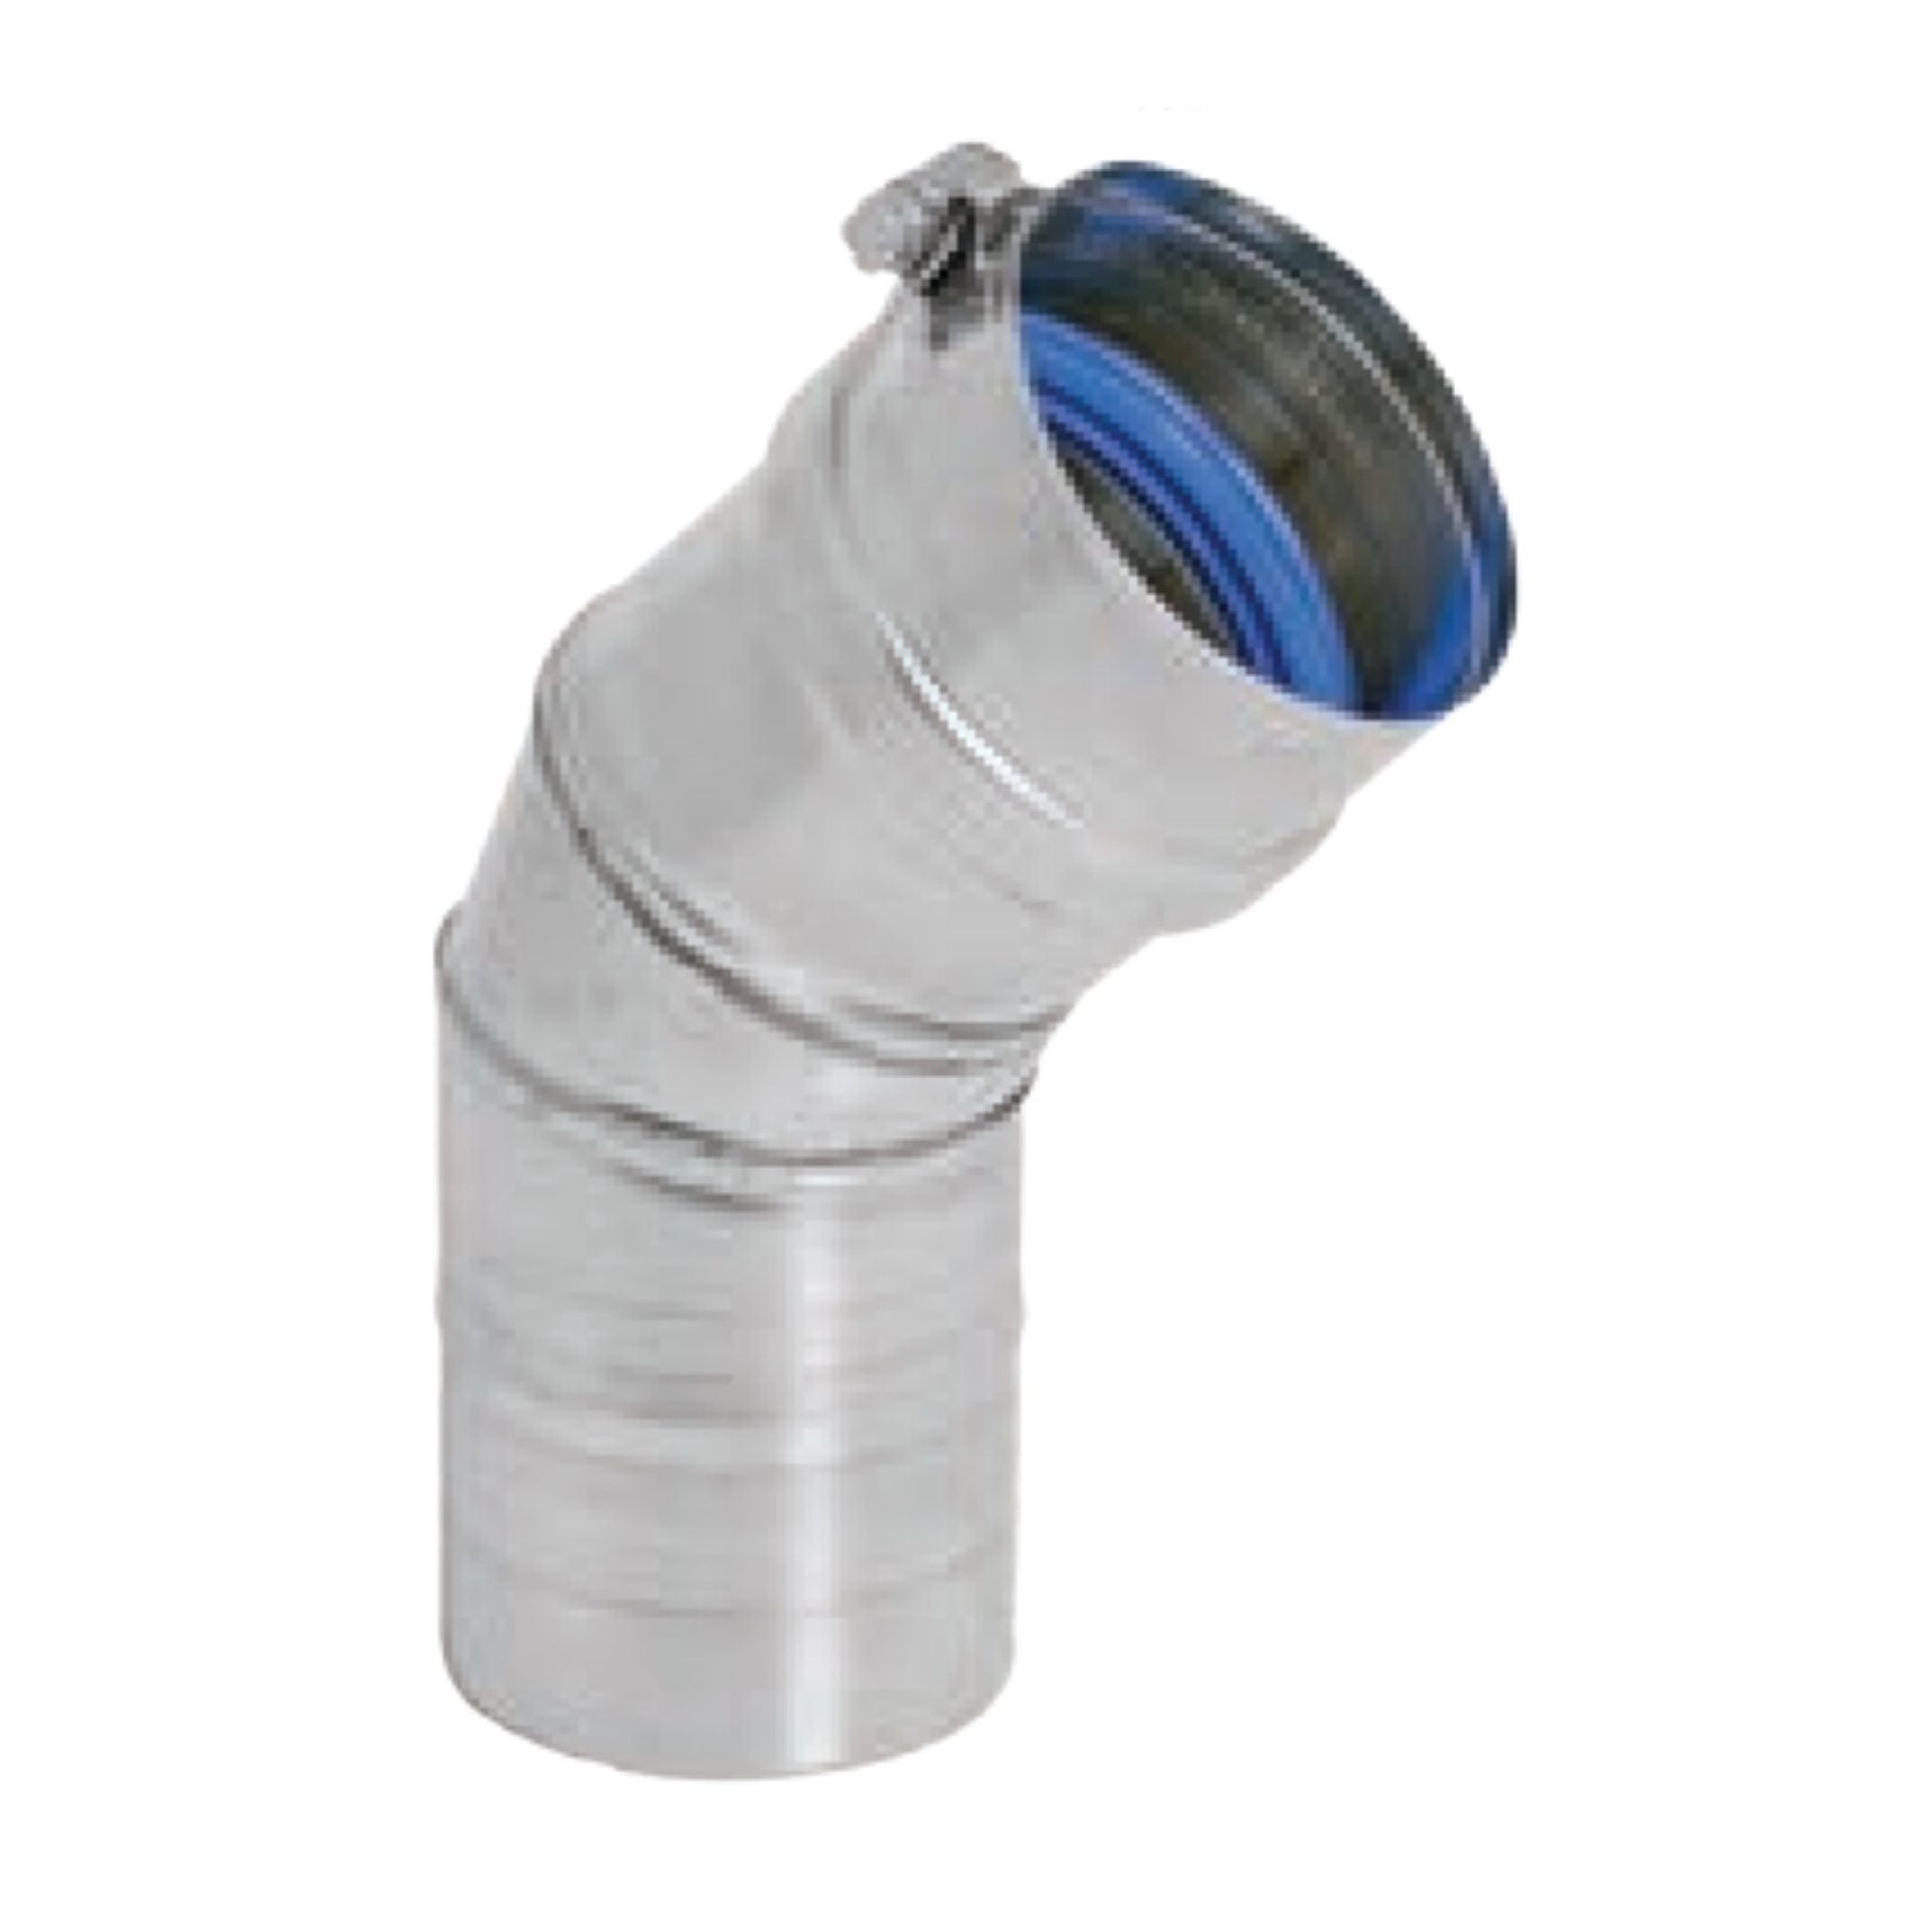 DuraVent FasNSeal 4" 45 Degree 316L Stainless Steel Elbow